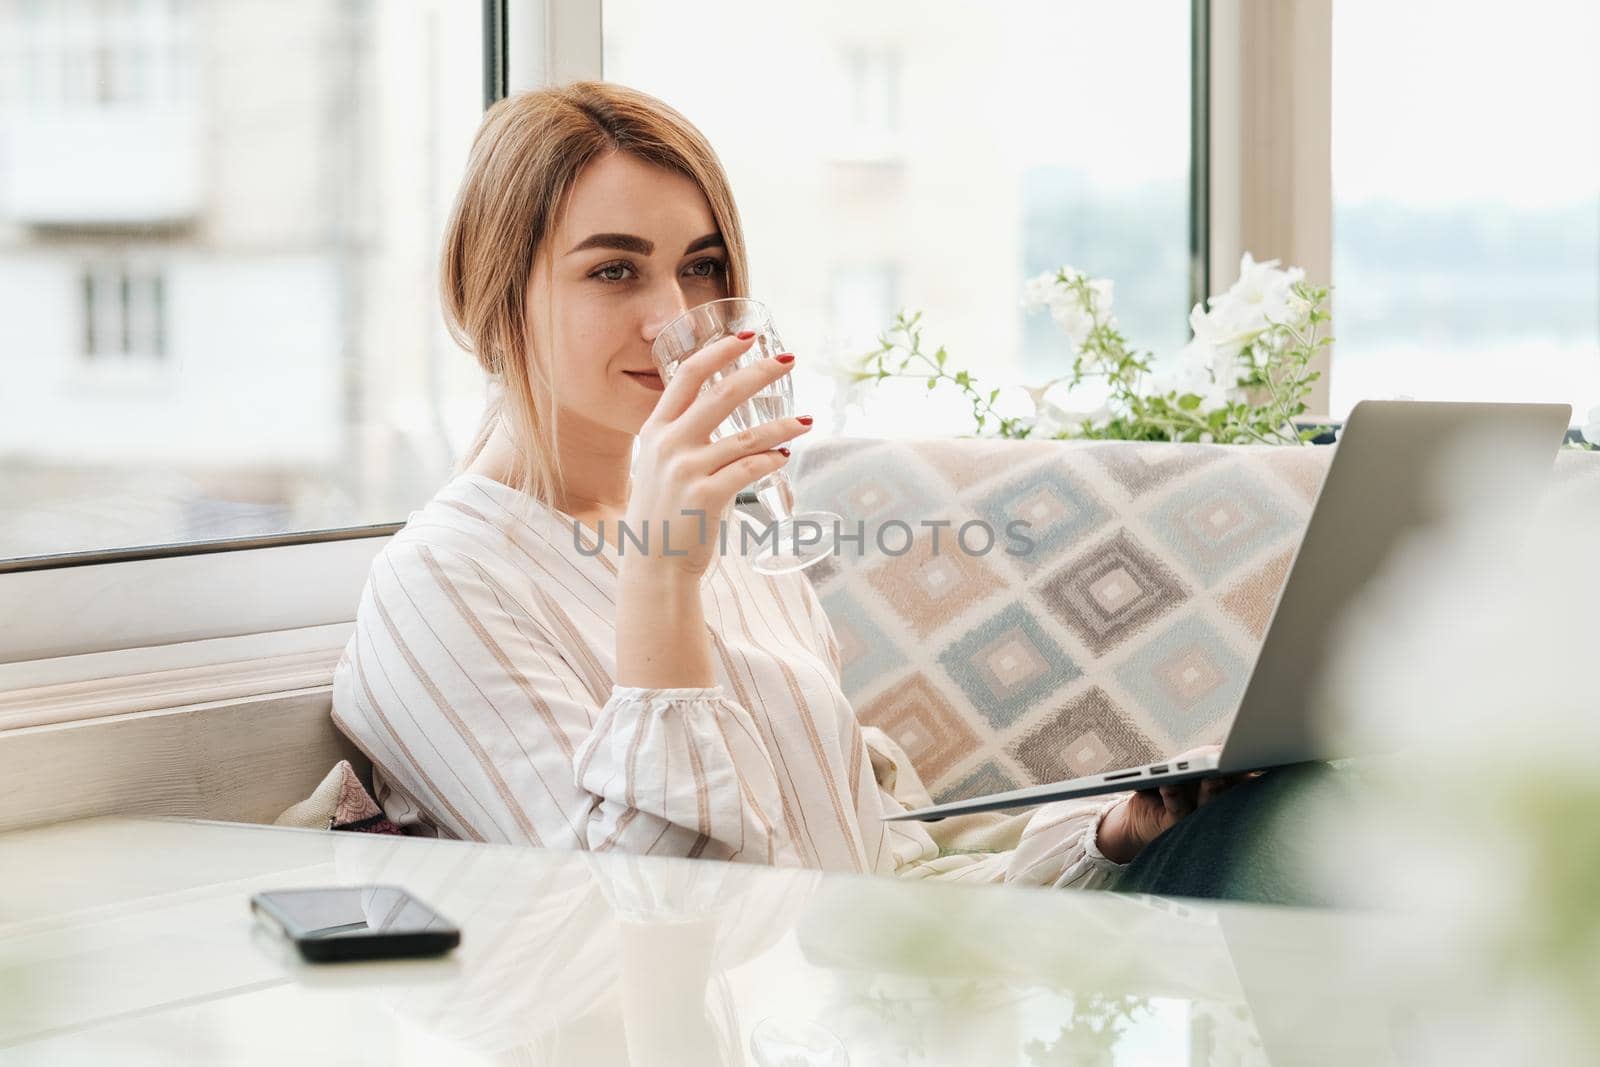 Young Woman Holding Laptop and Drinking Water While Sitting in the Restaurant,Female Freelancer at Work by Romvy